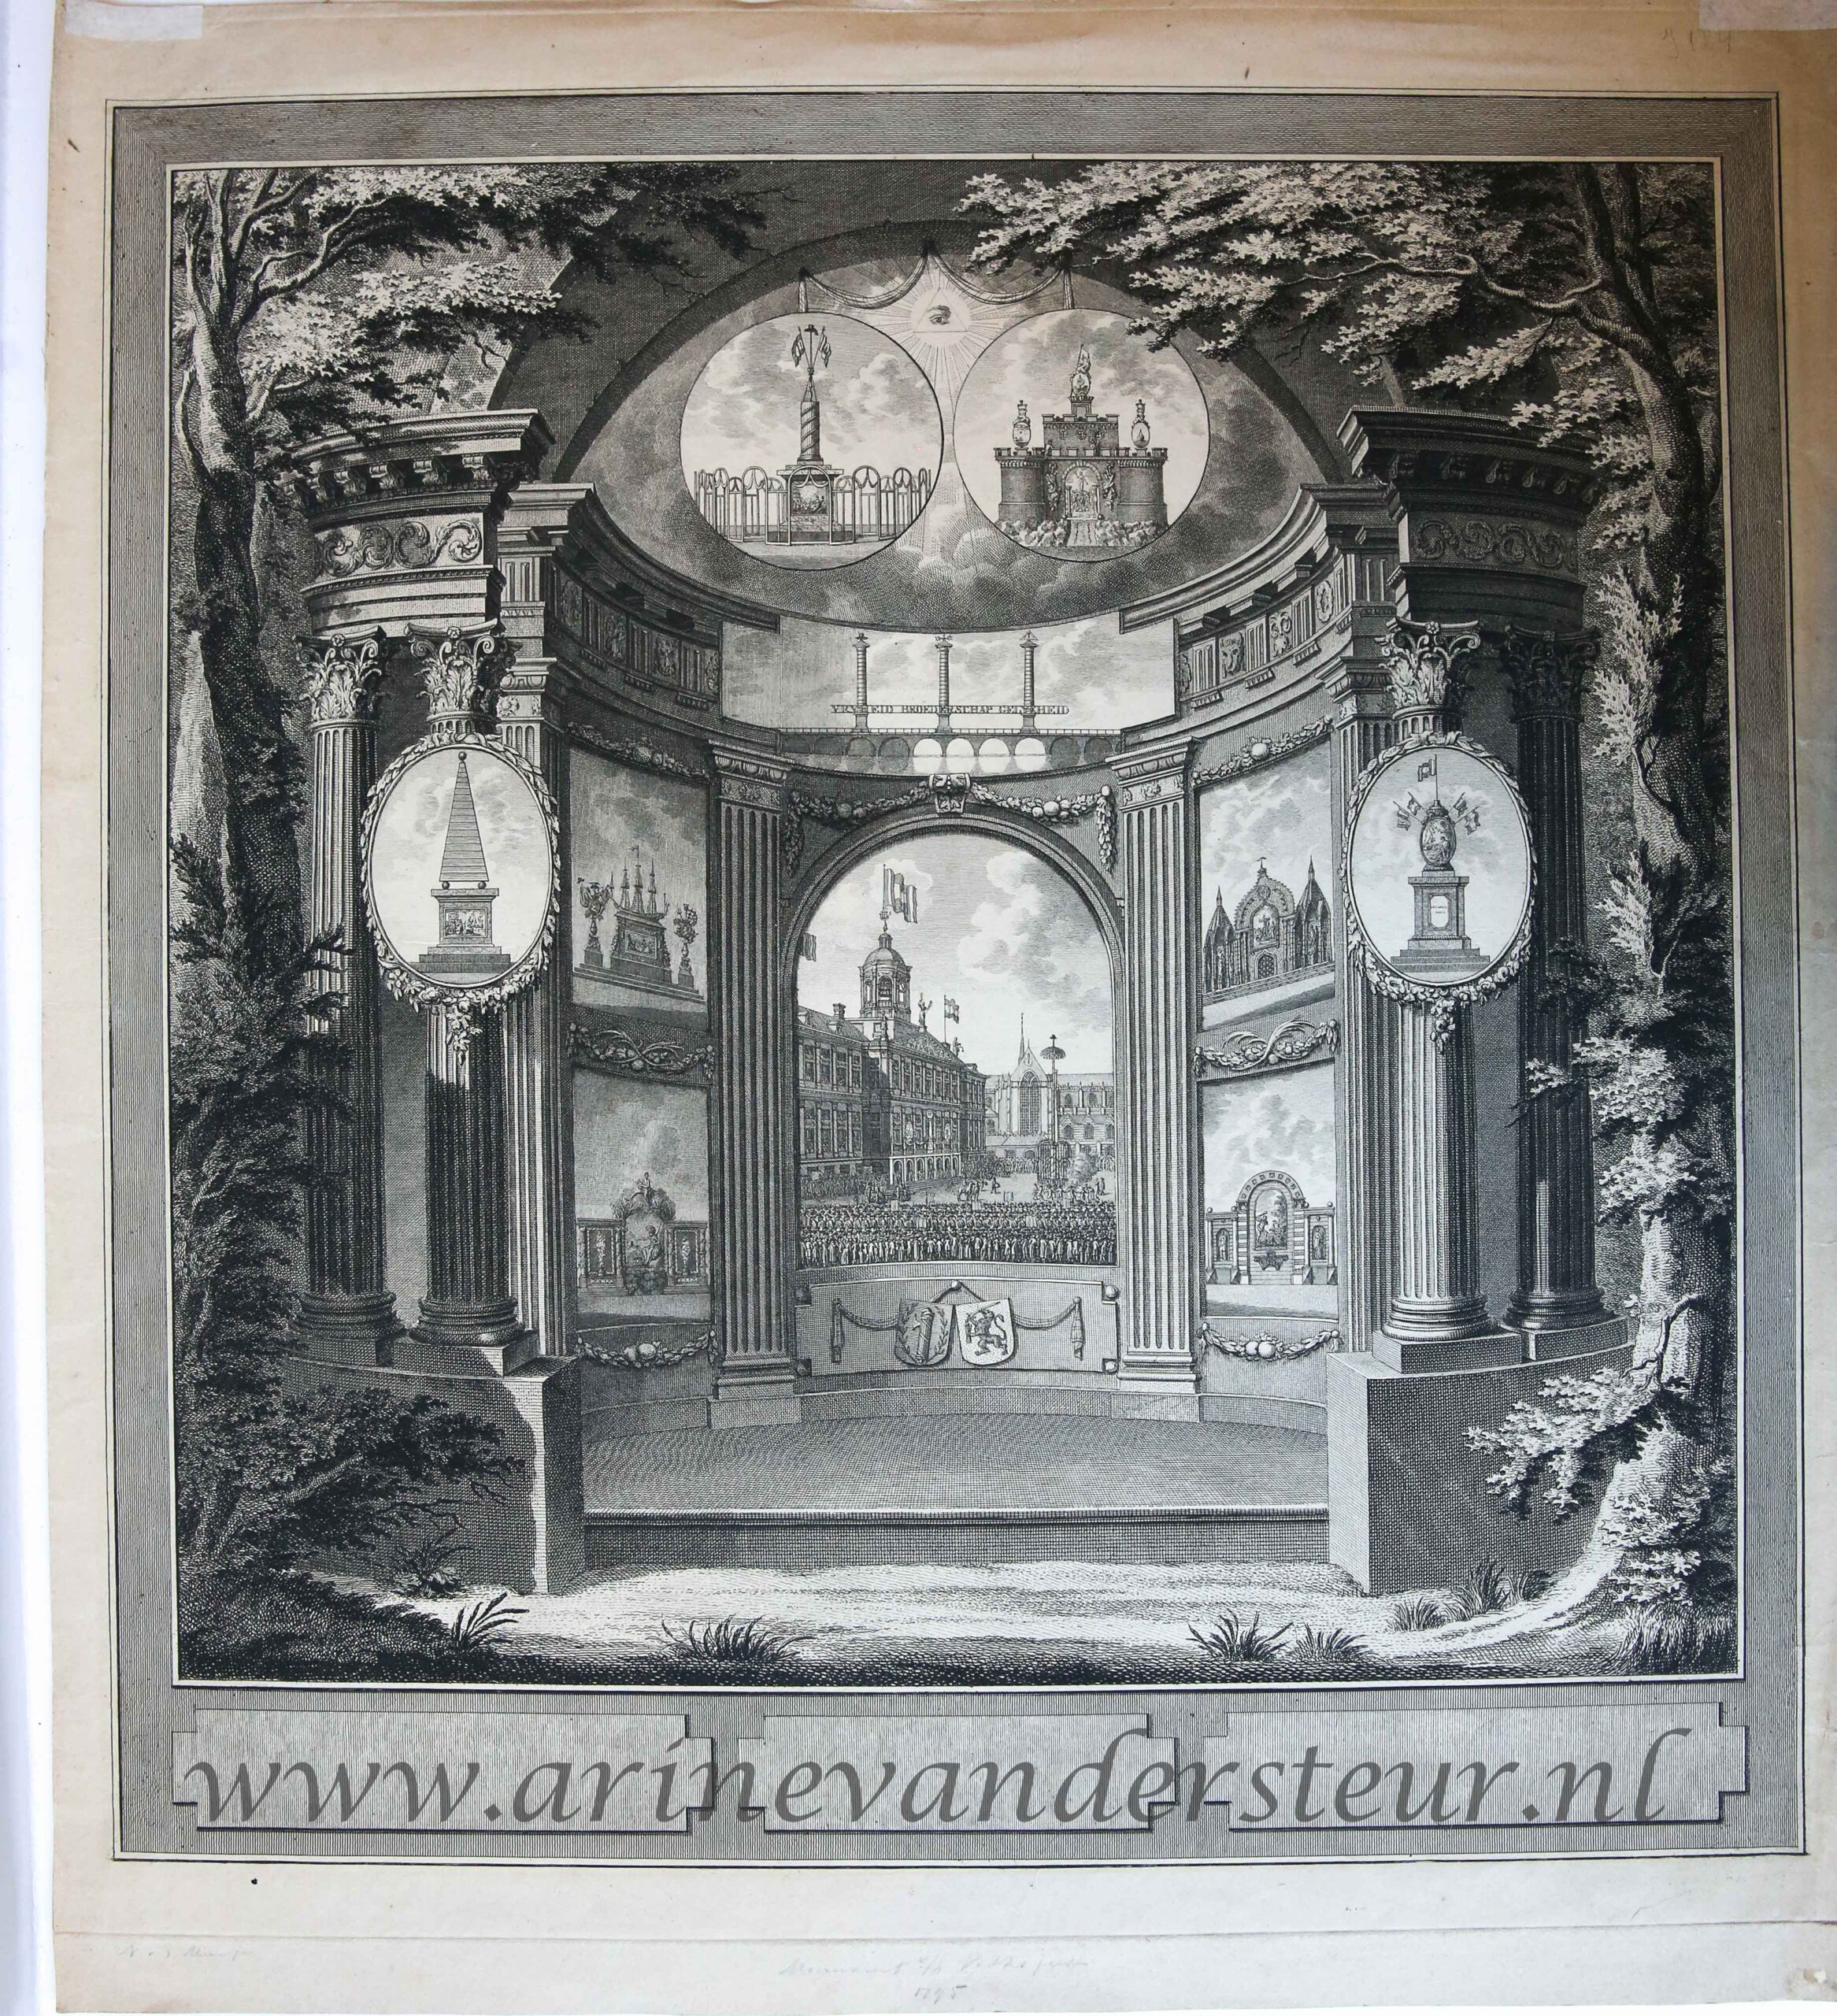 [Antique print, etching, Amsterdam] Monument for the Alliance festival in Amsterdam, published 1795.